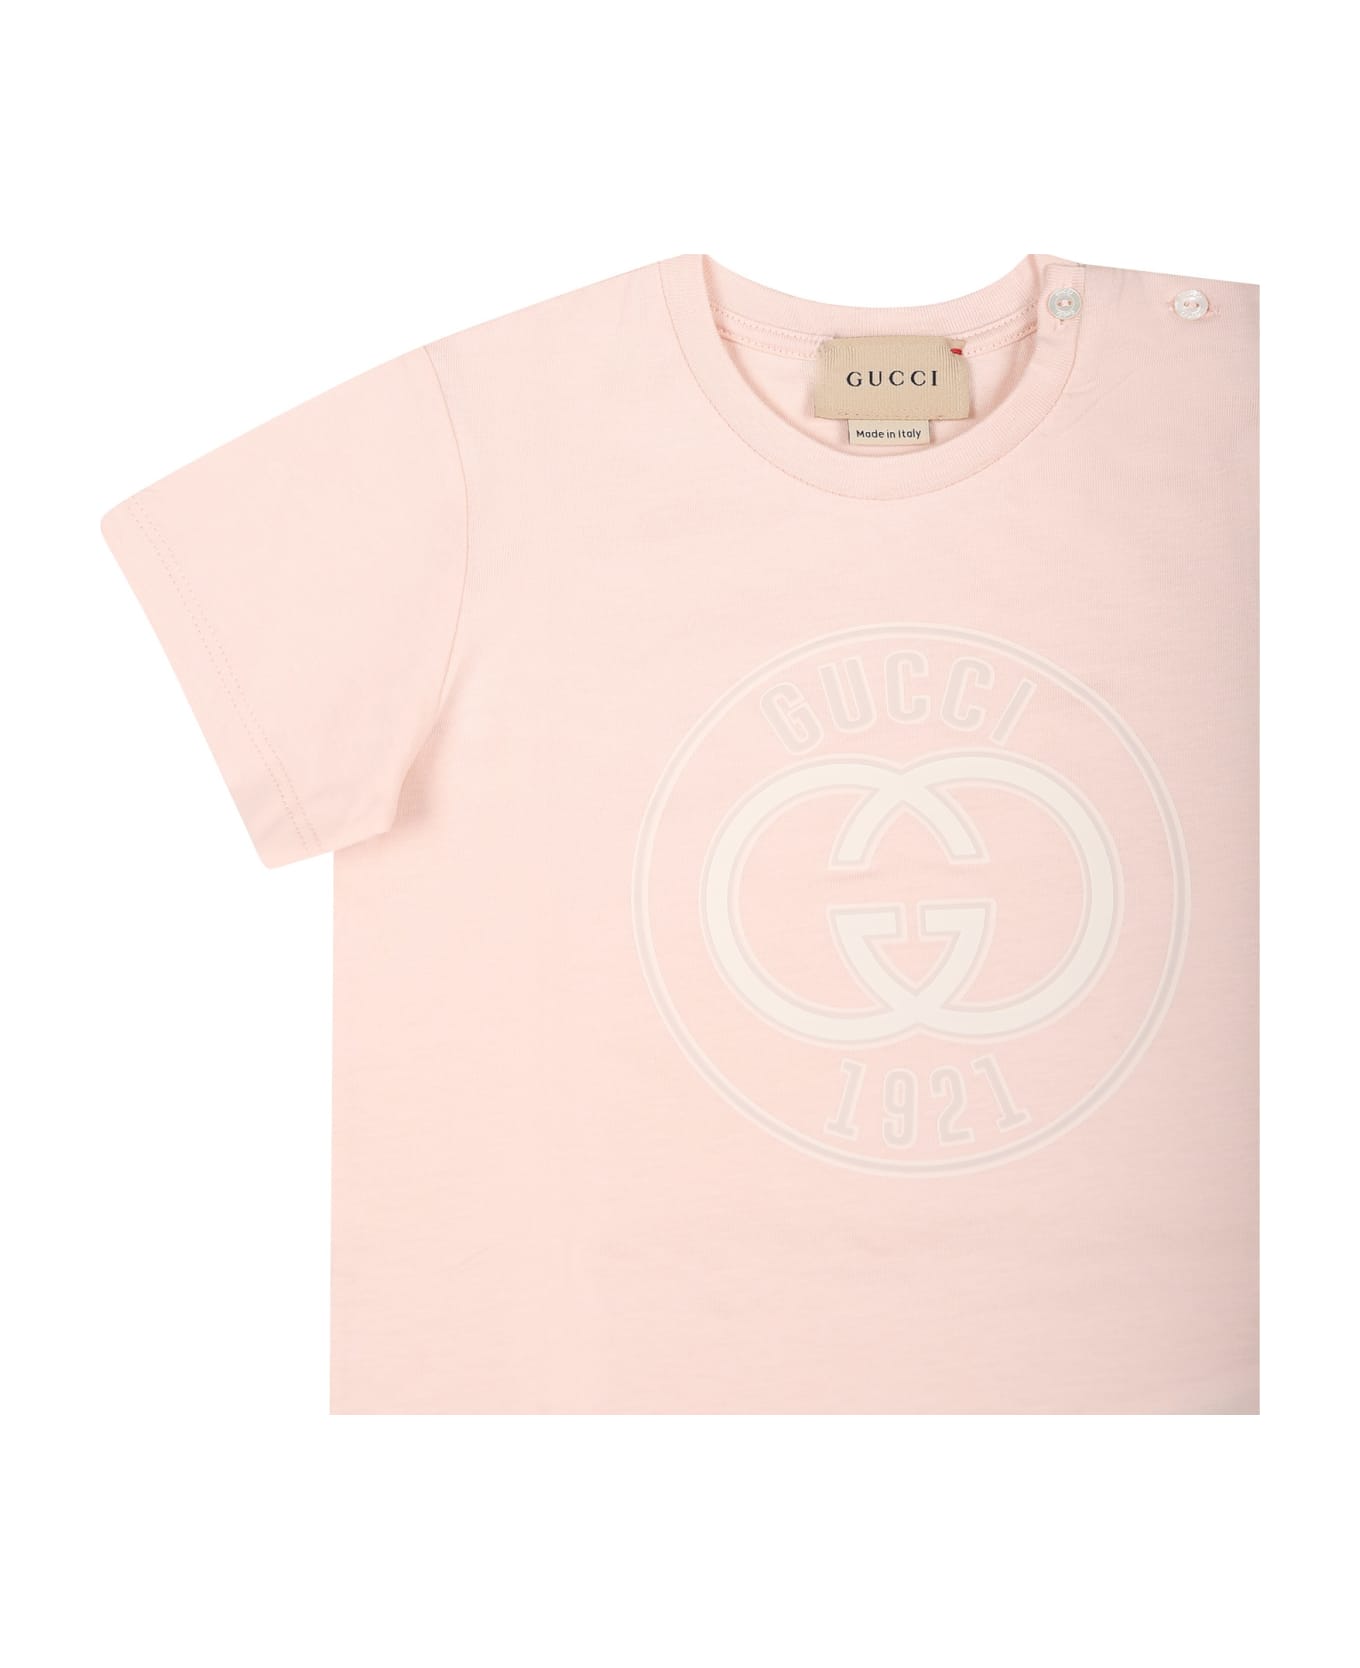 Gucci Pink T-shirt For Baby Girl With Logo Gucci 1921 - Pink